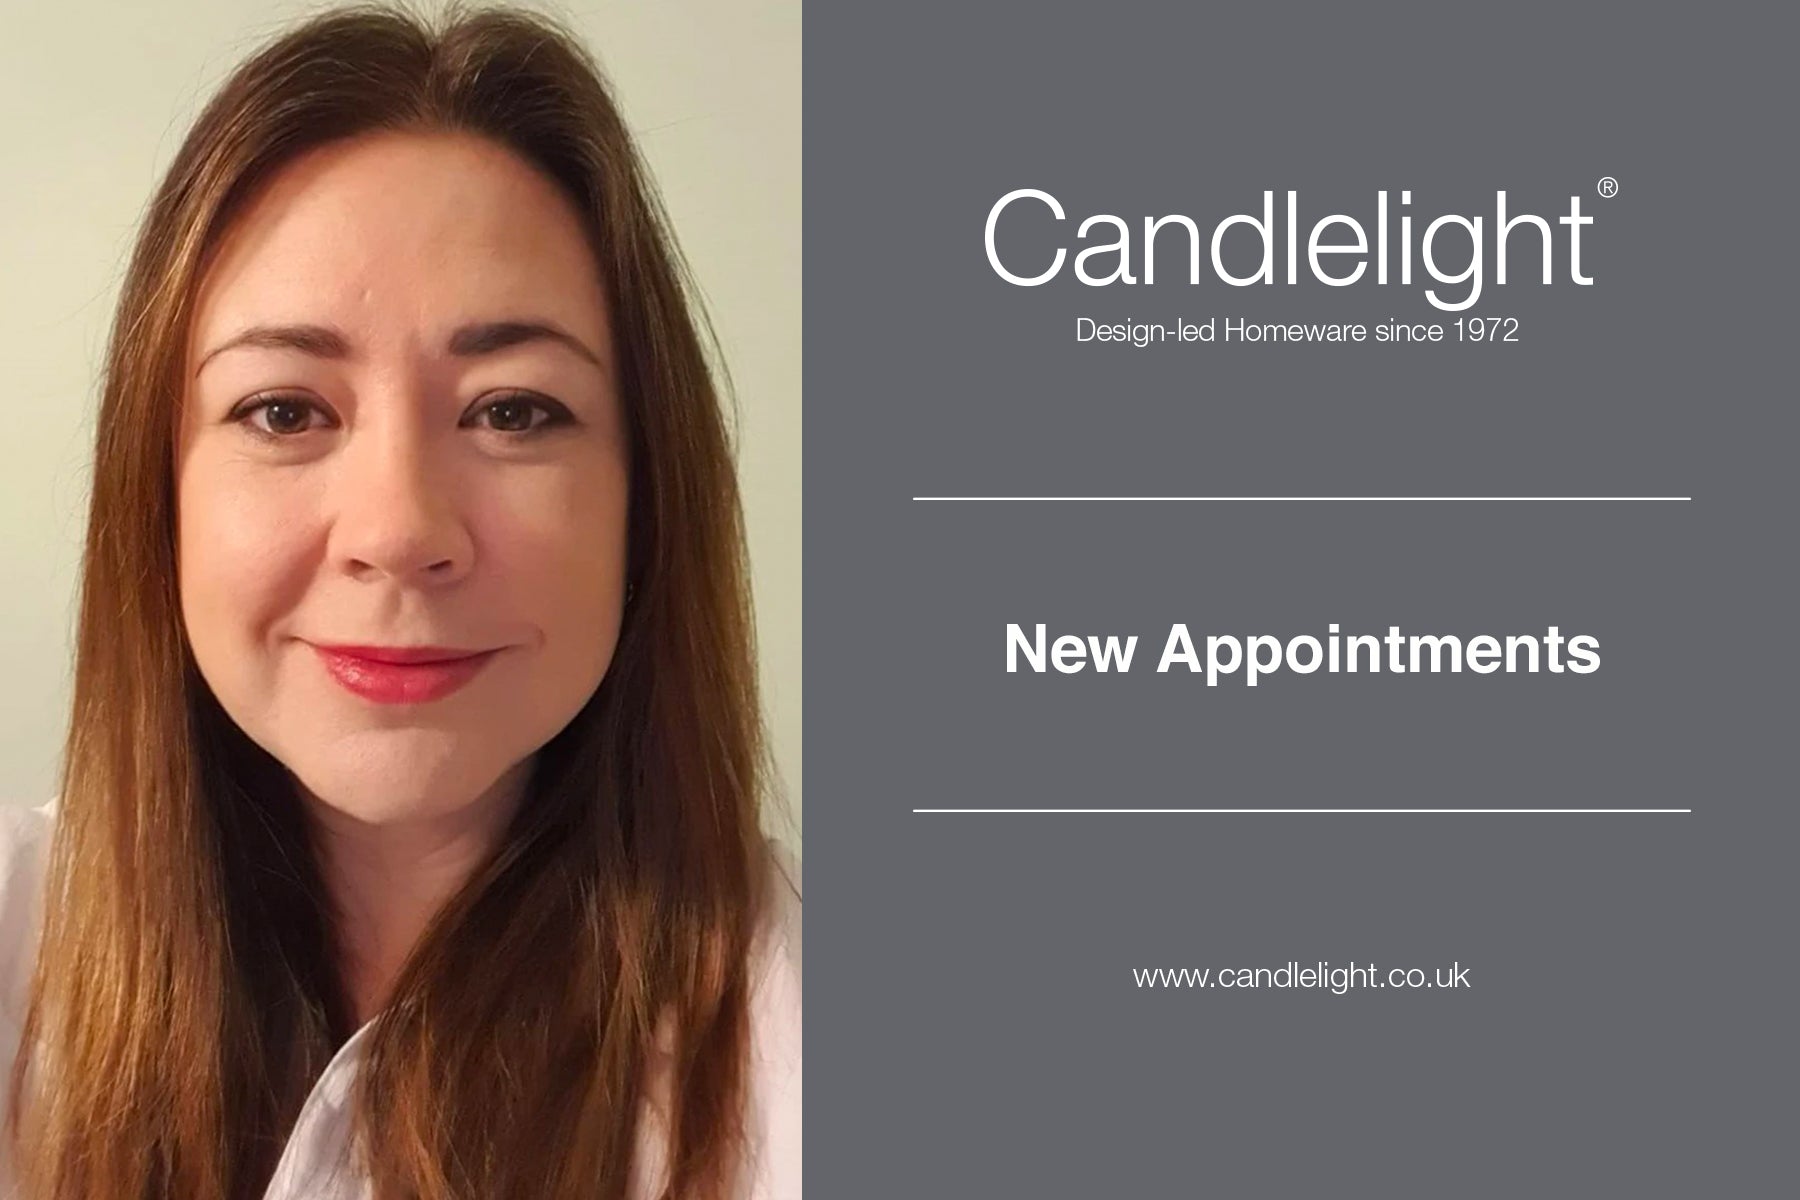 New Appointments at Candlelight